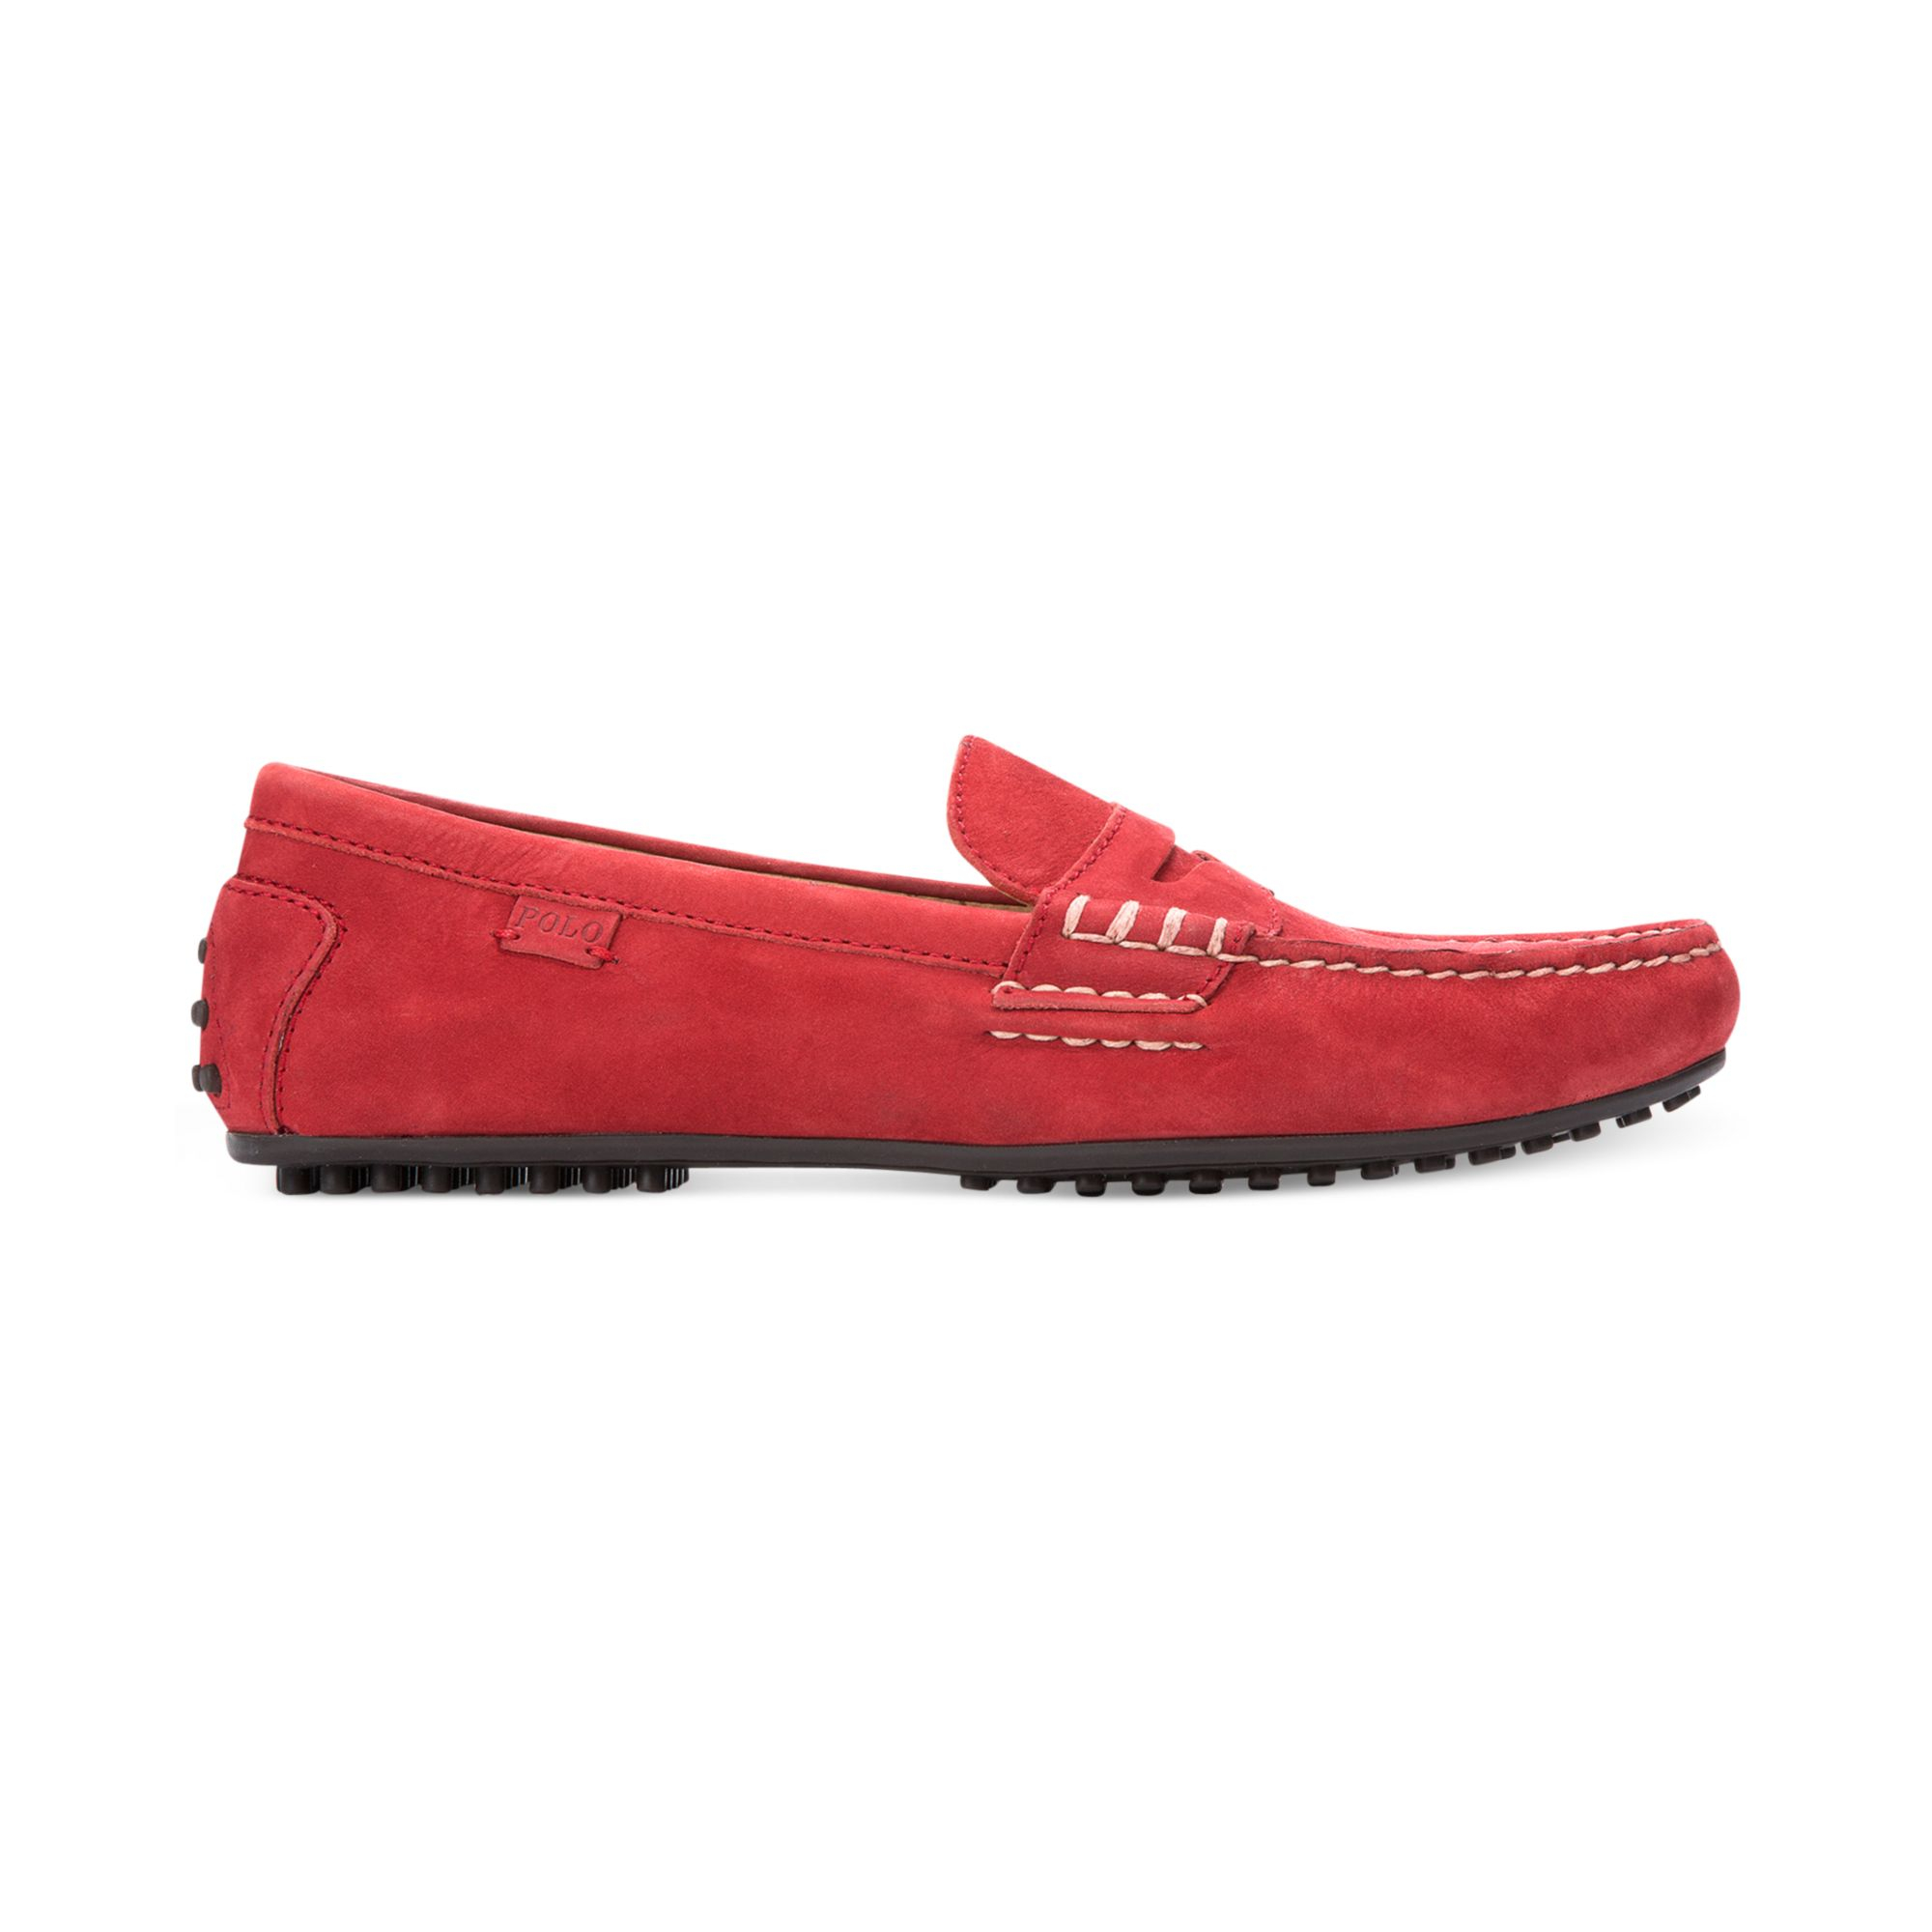 Ralph Lauren Polo Wes Penny Loafers in 